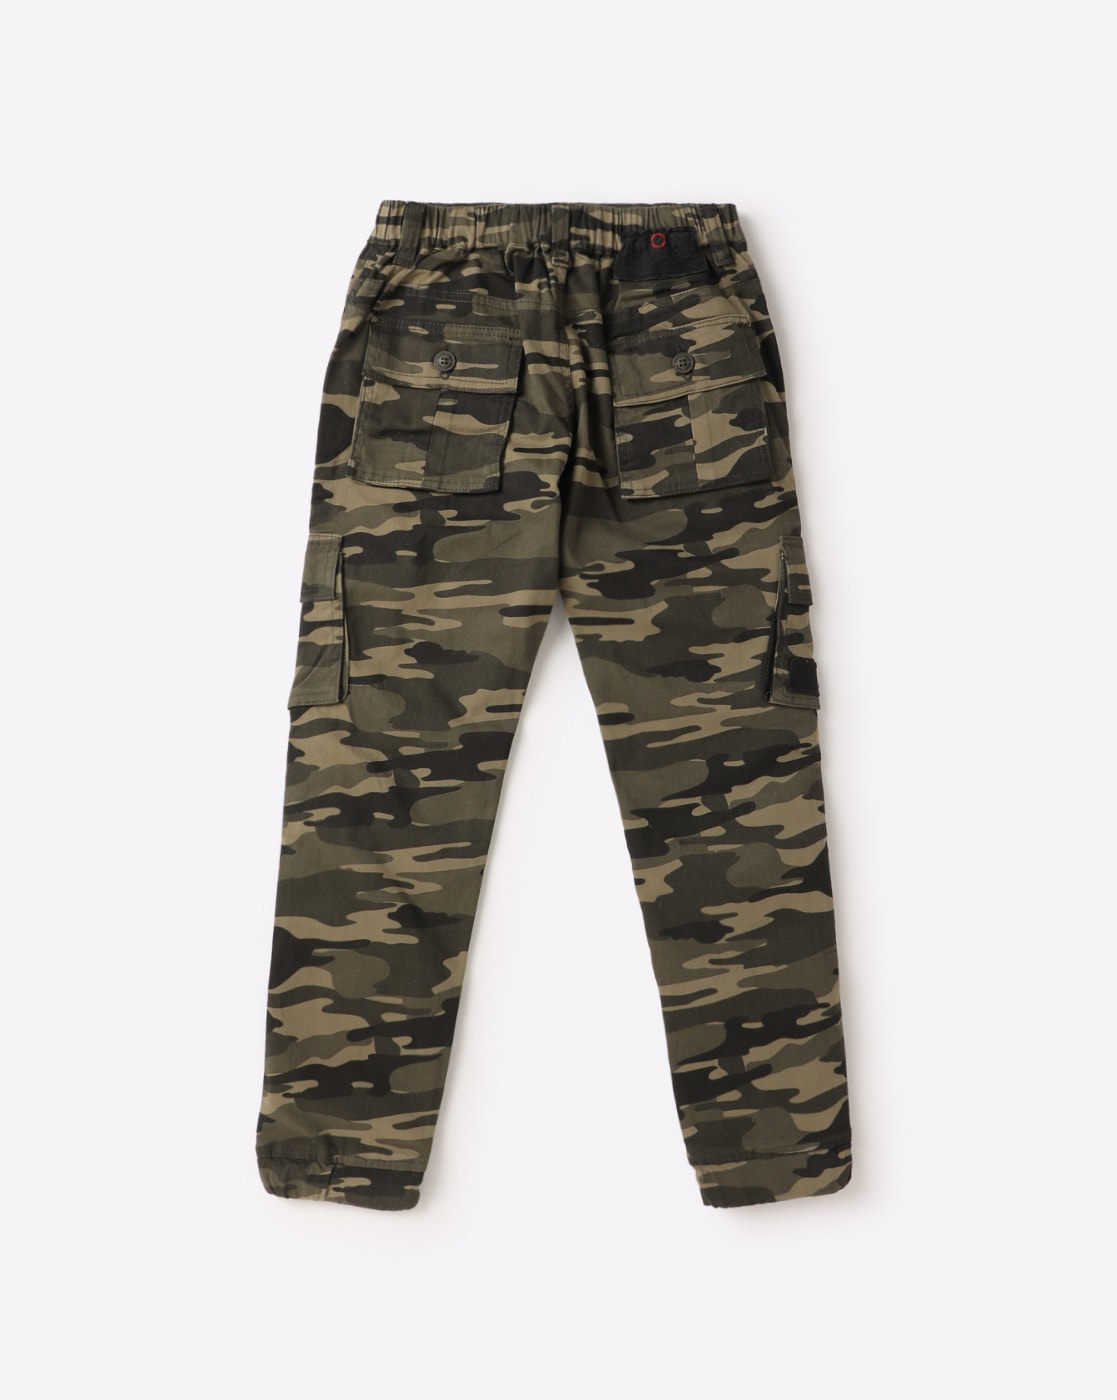 Buy Olive Green Trousers  Pants for Men by GAS Online  Ajiocom